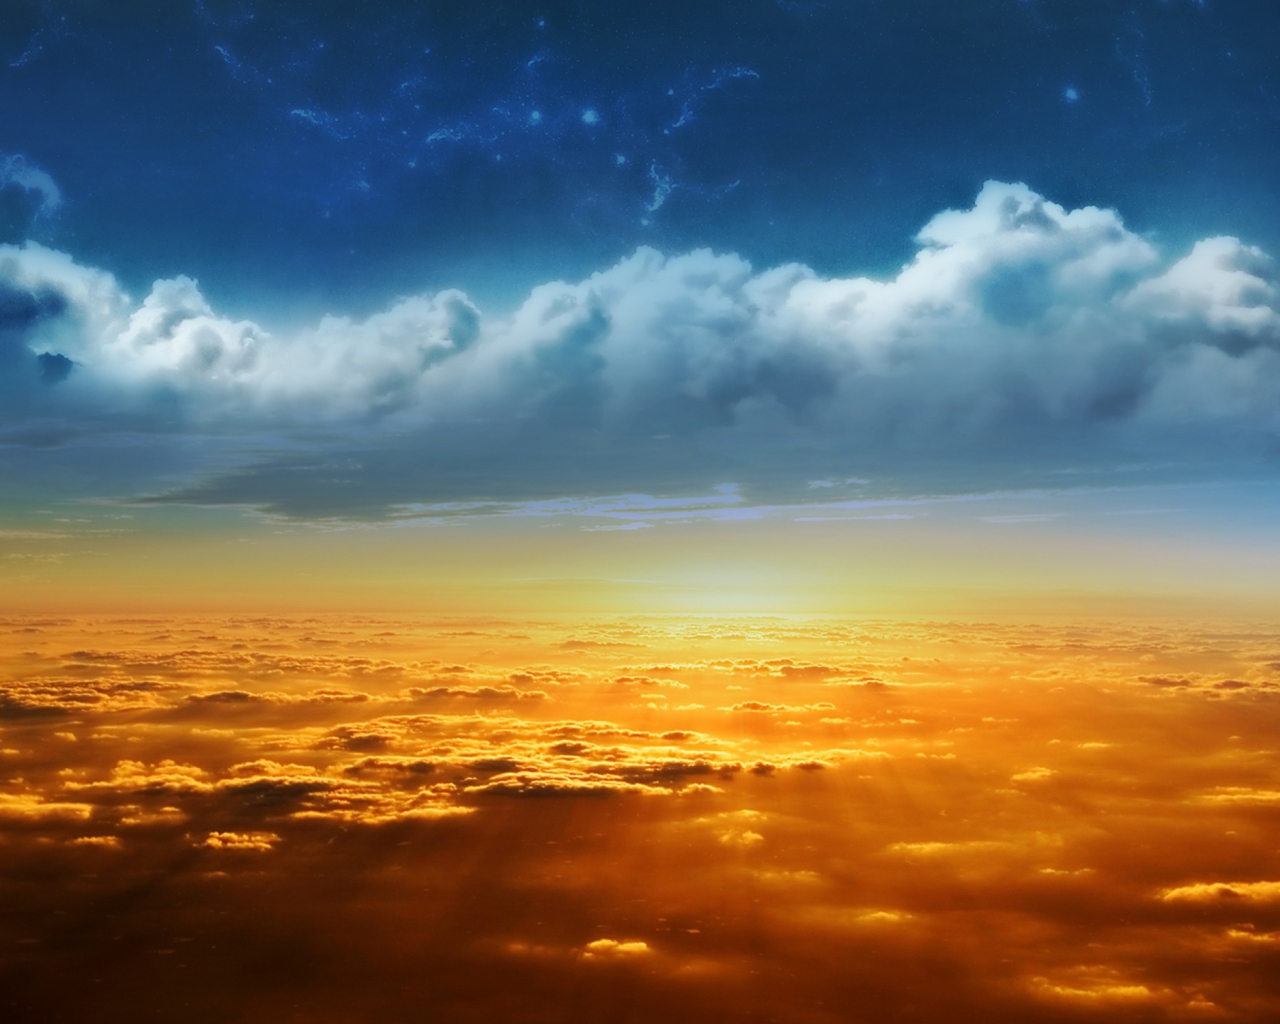 Behind The Clouds wallpaper 1280x1024